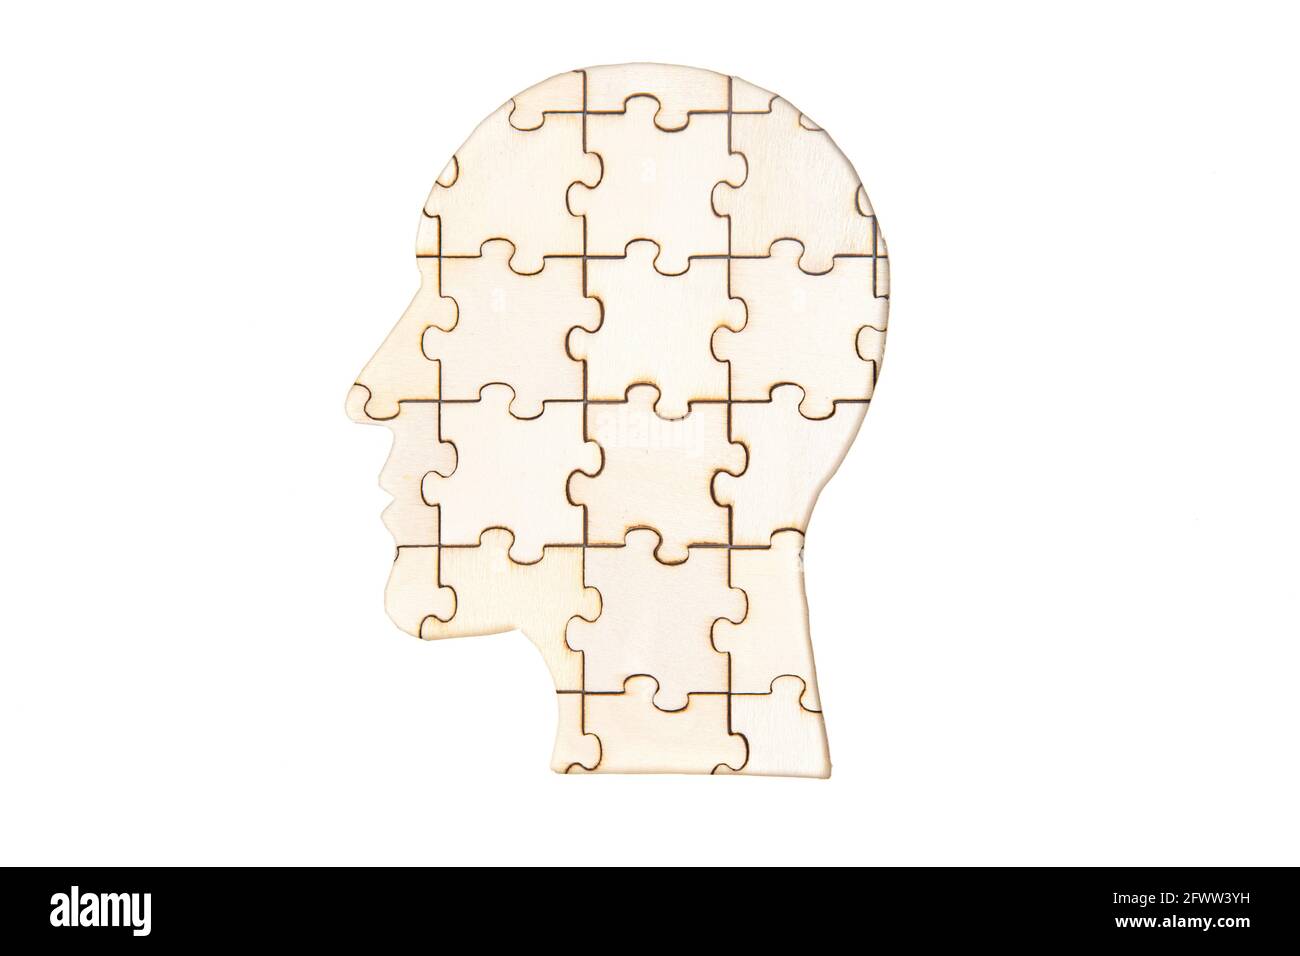 Silhouette of a man's head made from wooden puzzle pieces isolated on white Stock Photo